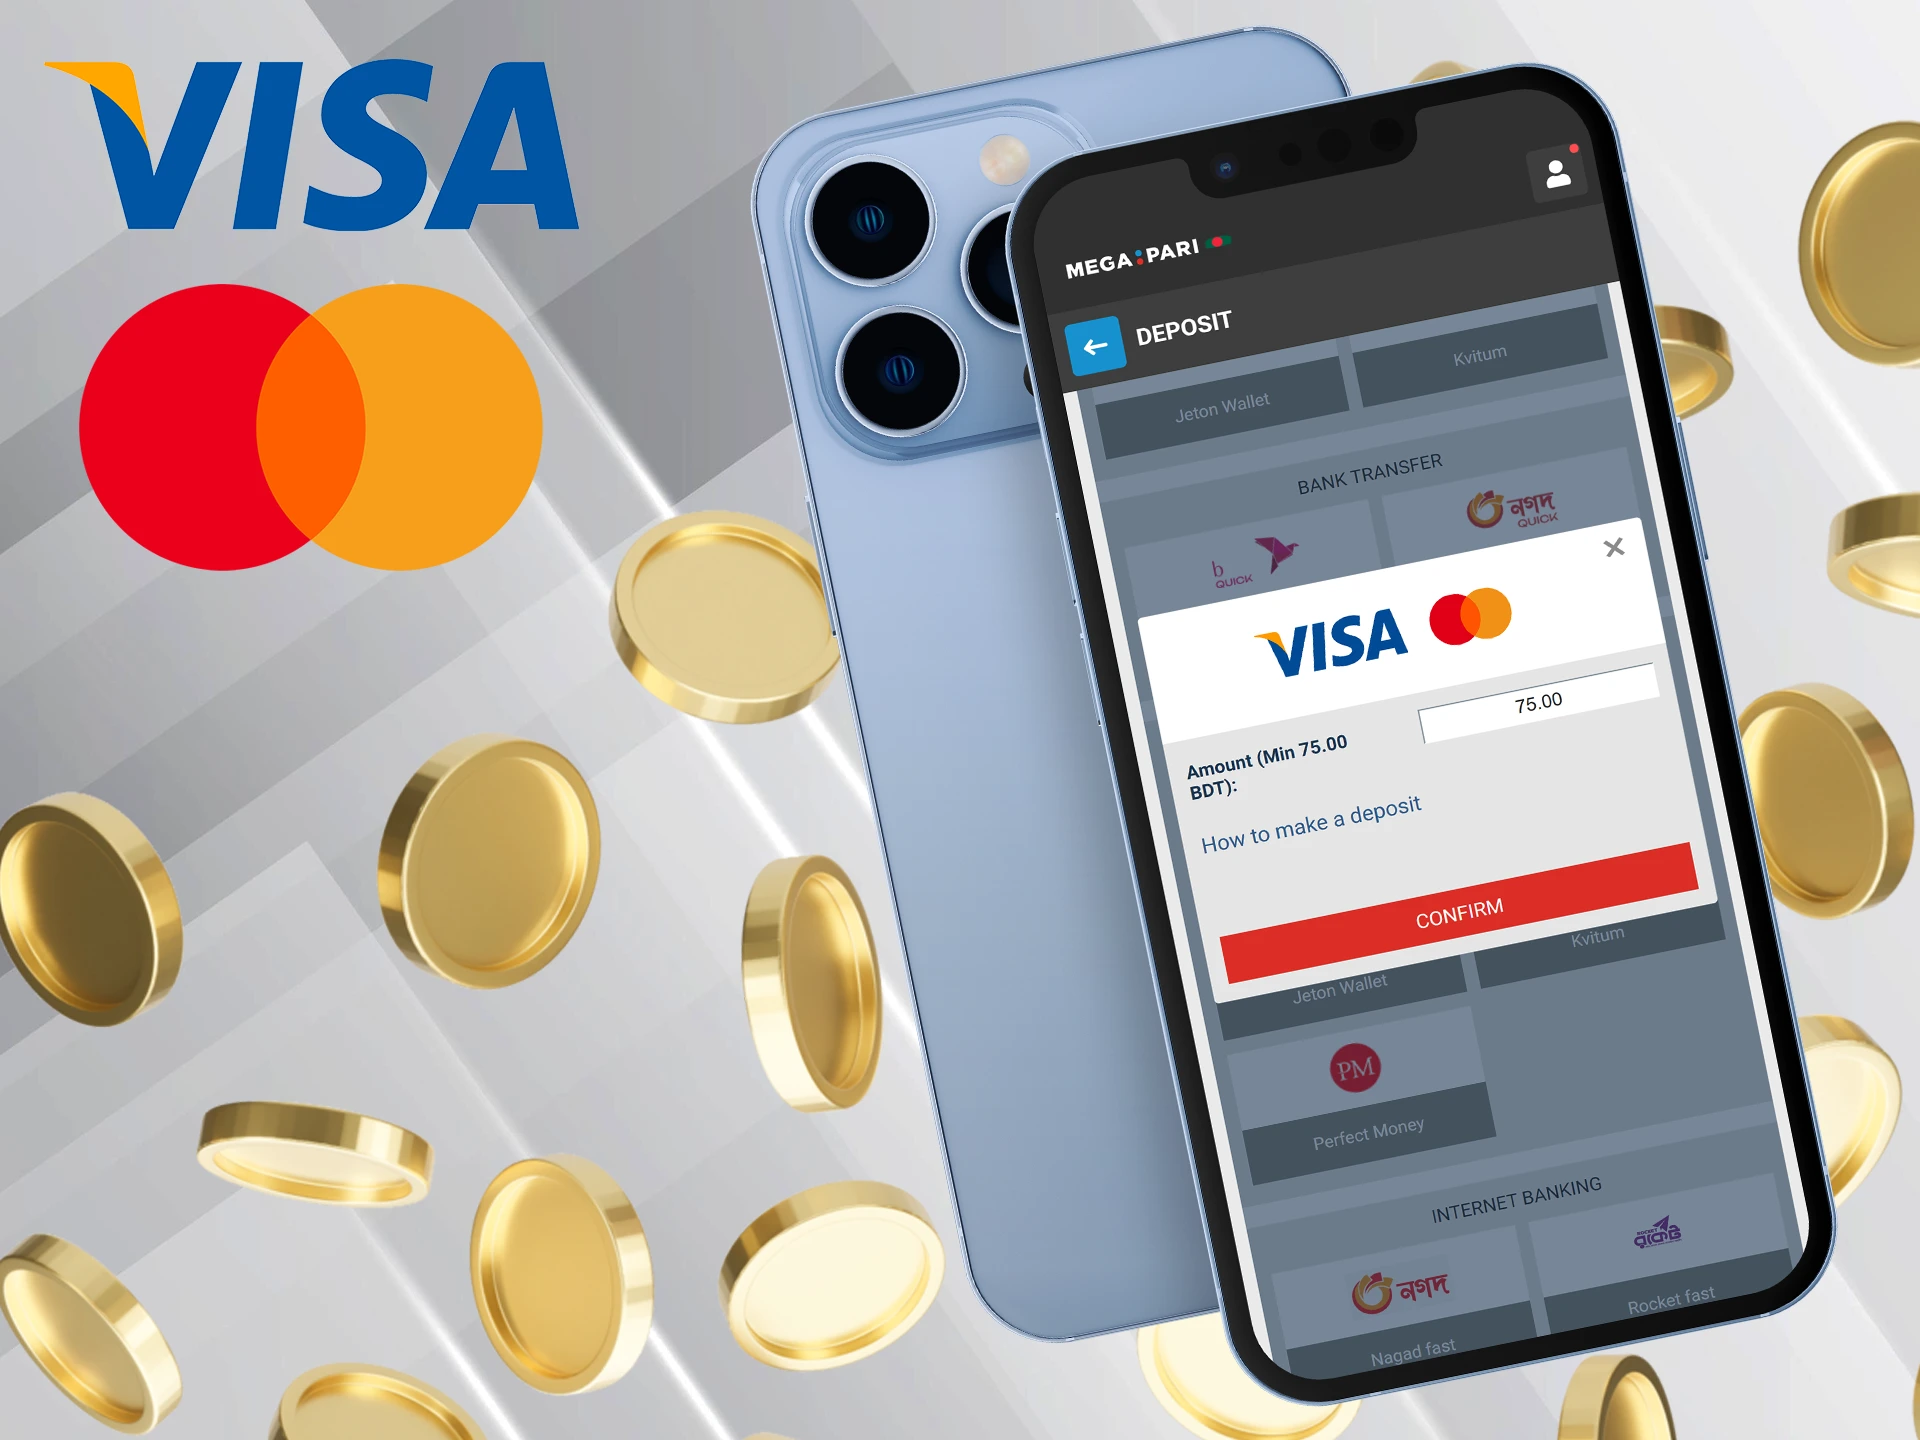 You can fund your account with Visa and Mastercard.